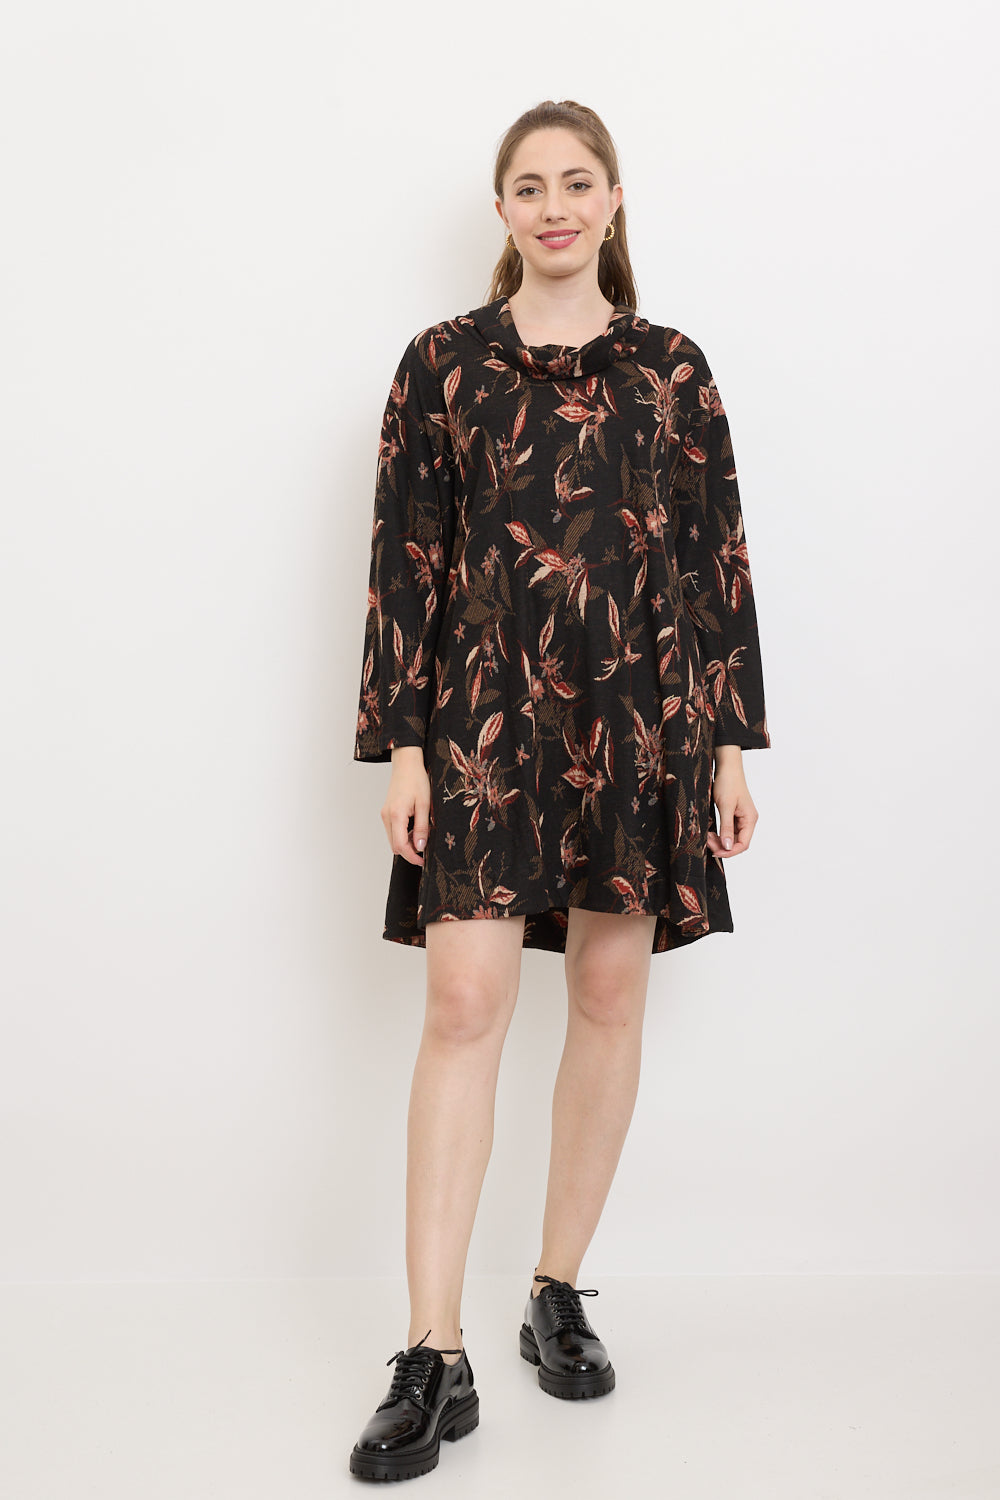 Tunic dress with fall floral patterns